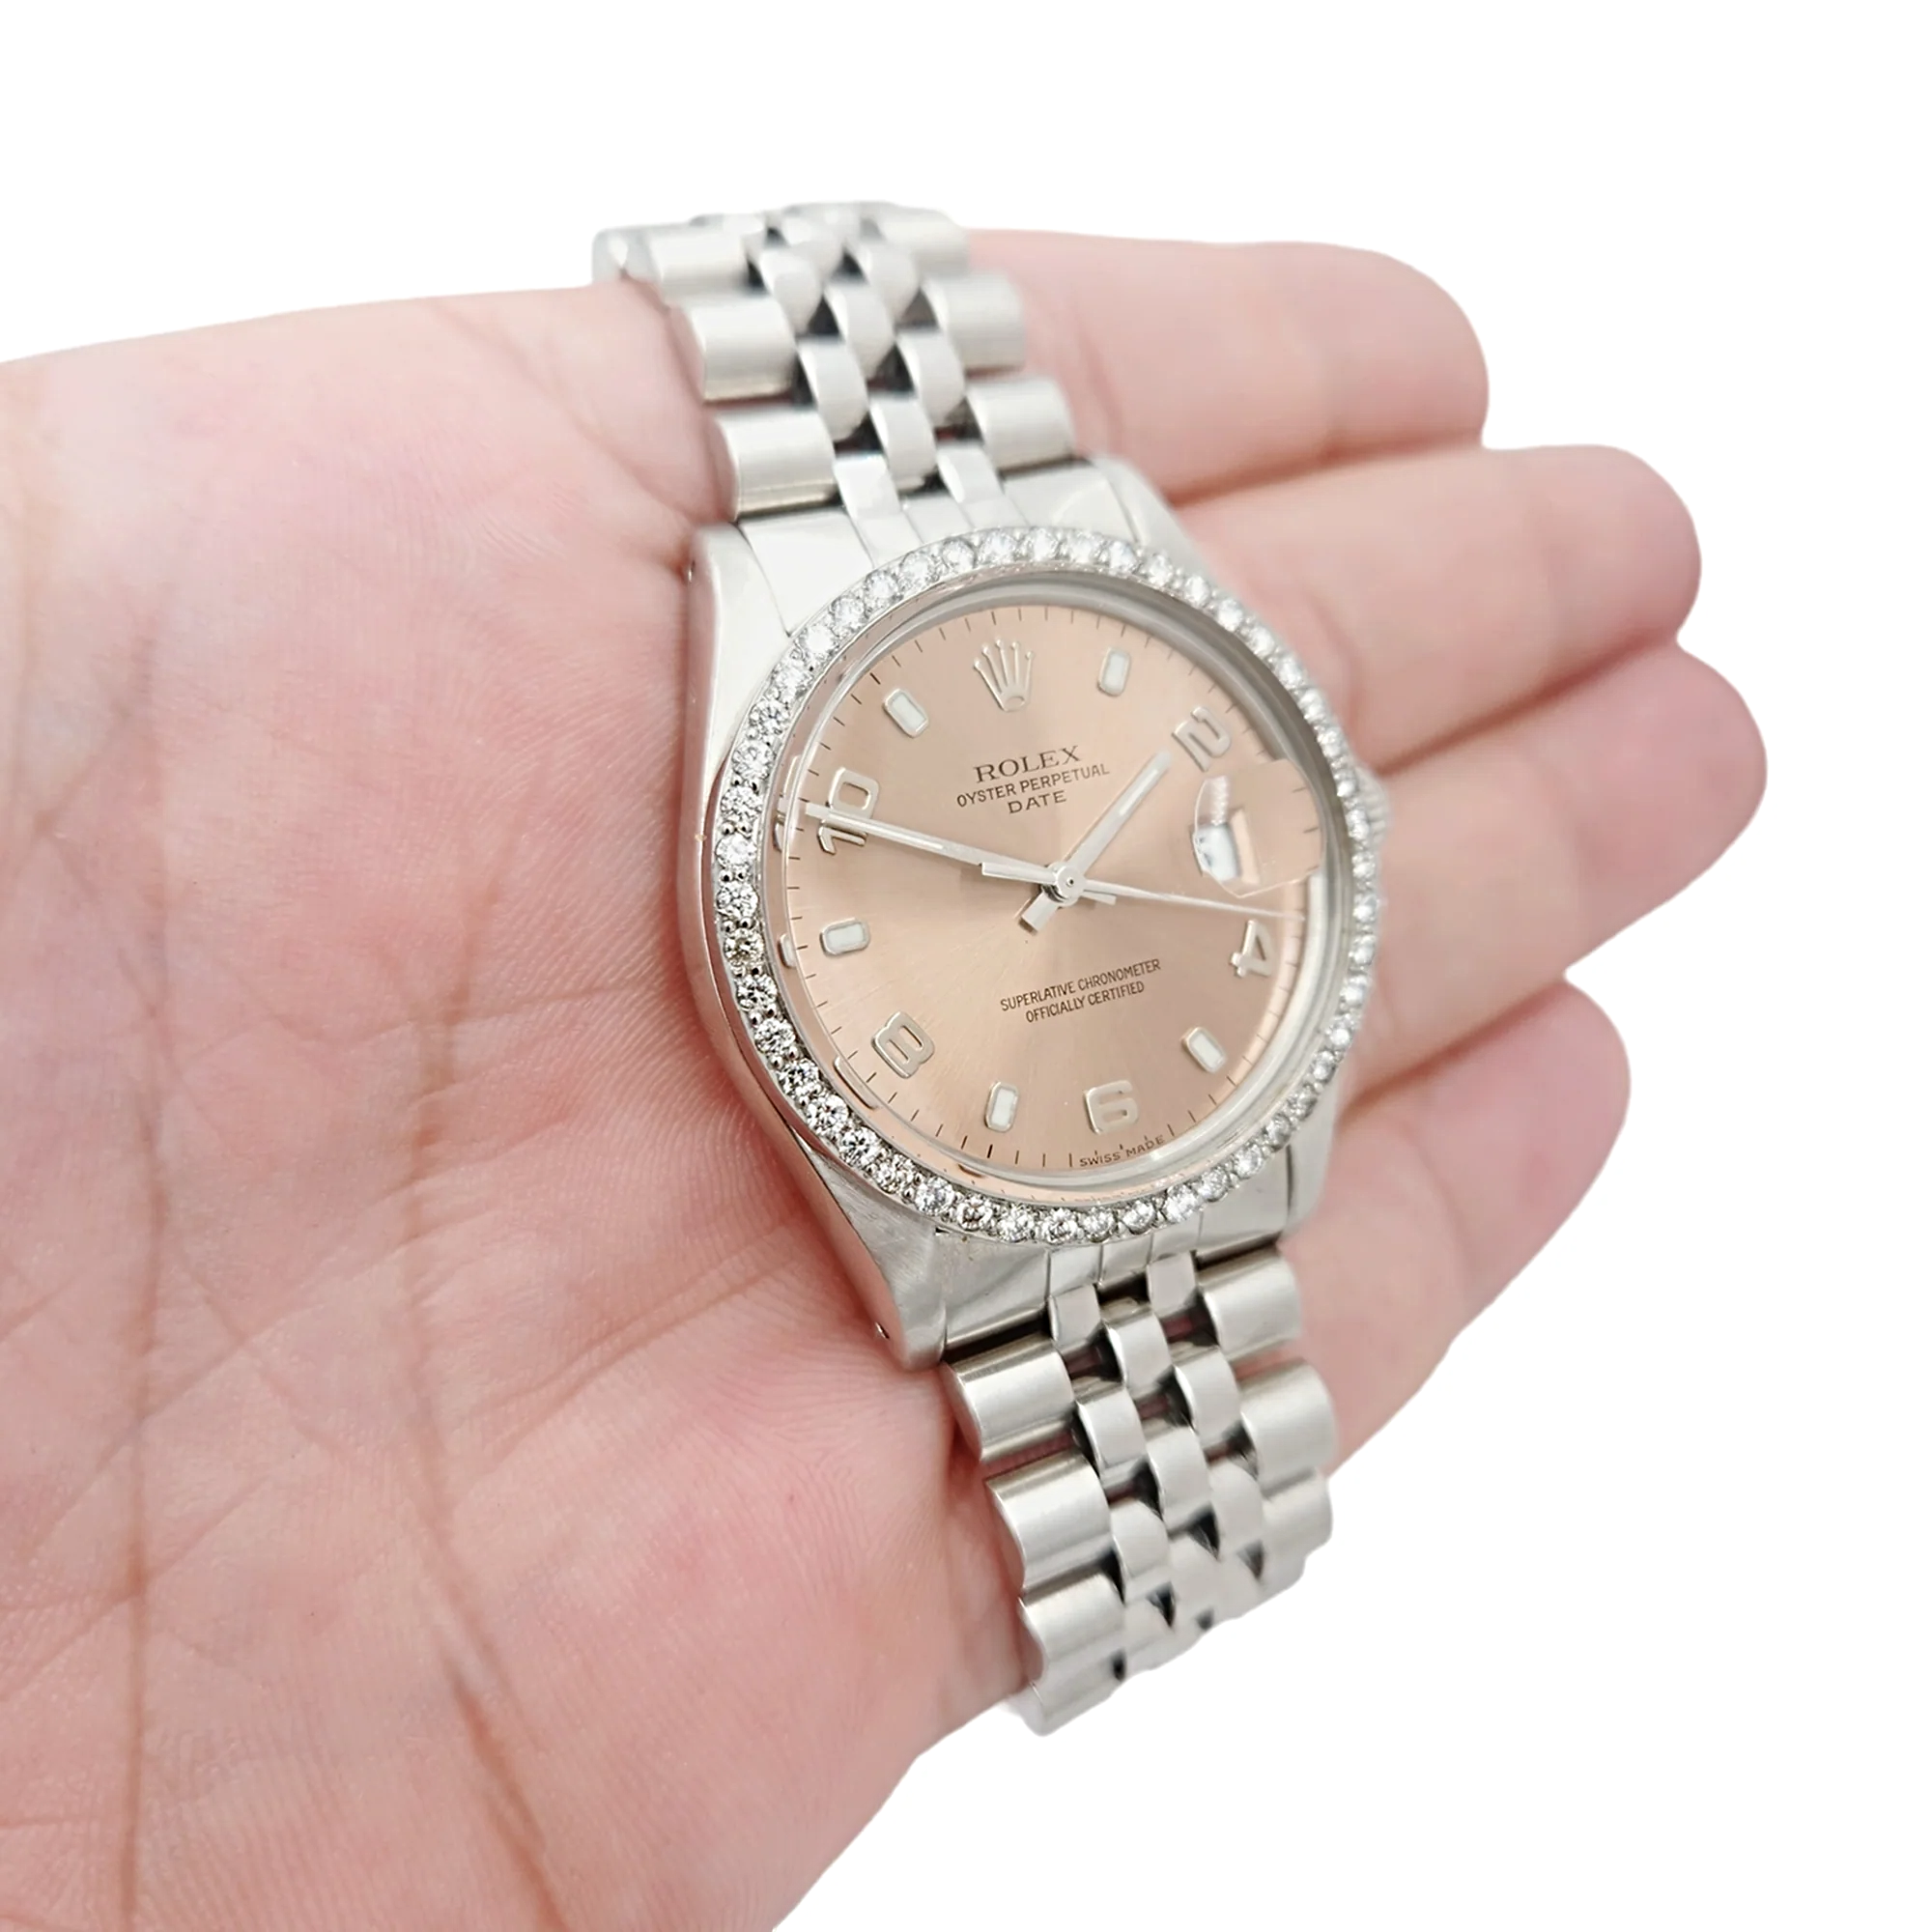 Men's Rolex 34mm Date Vintage Stainless Steel Watch with Bronze Dial and Diamond Bezel. (Pre-Owned 15000)